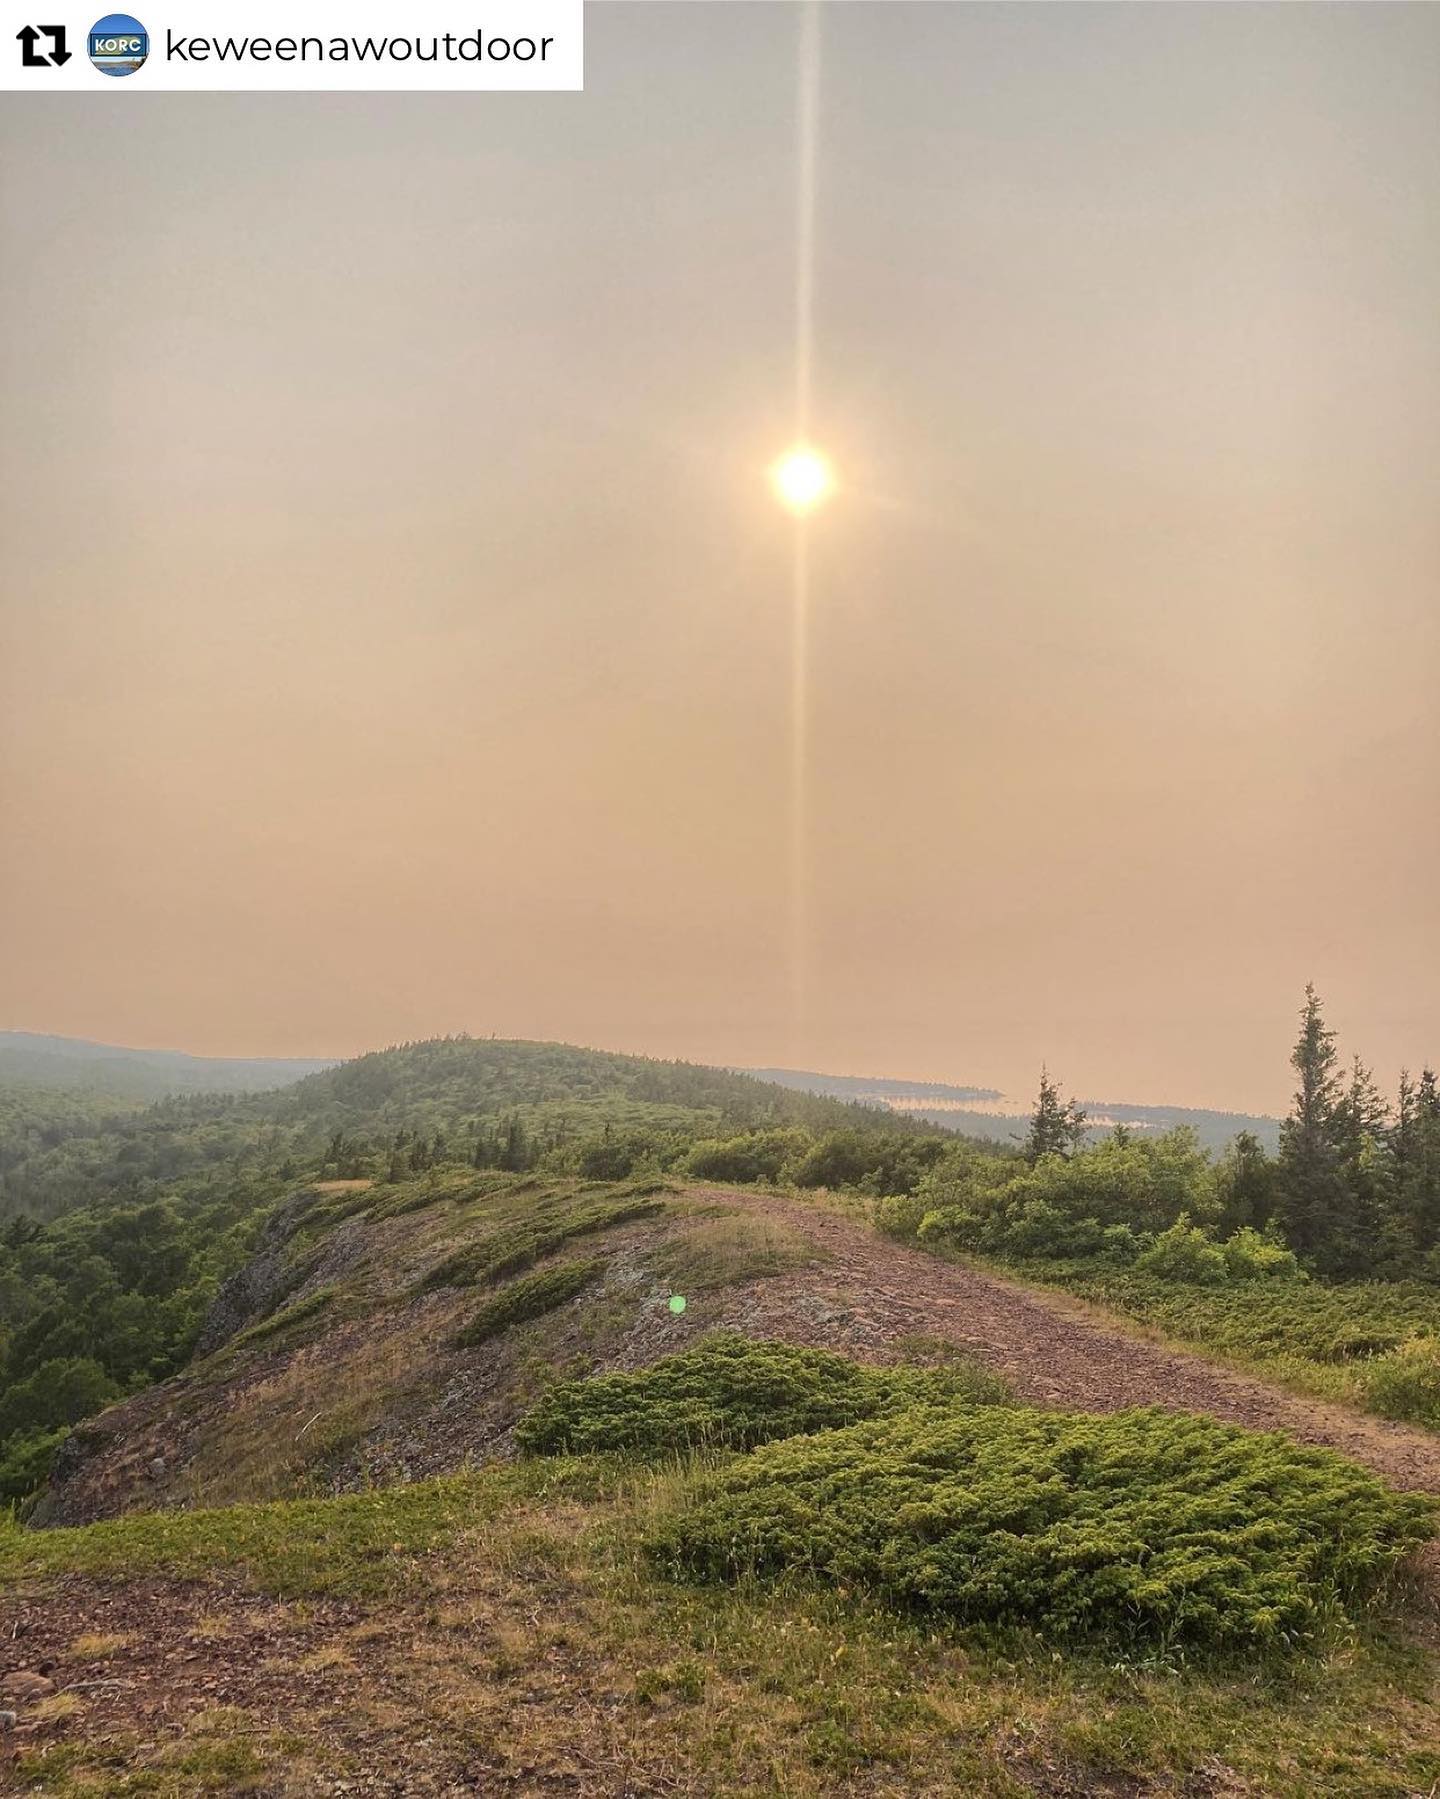 Thank you KORC!Repost from @keweenawoutdoor•Even through the heat and haze we have experienced this summer, the beauty of the Keweenaw can’t be beat! Make sure to respond to our latest Call to Action to help expand conservation of these incredible landscapes and secure public access for all forms of outdoor recreation for generations to come! Link in our bio. #copperharbormi